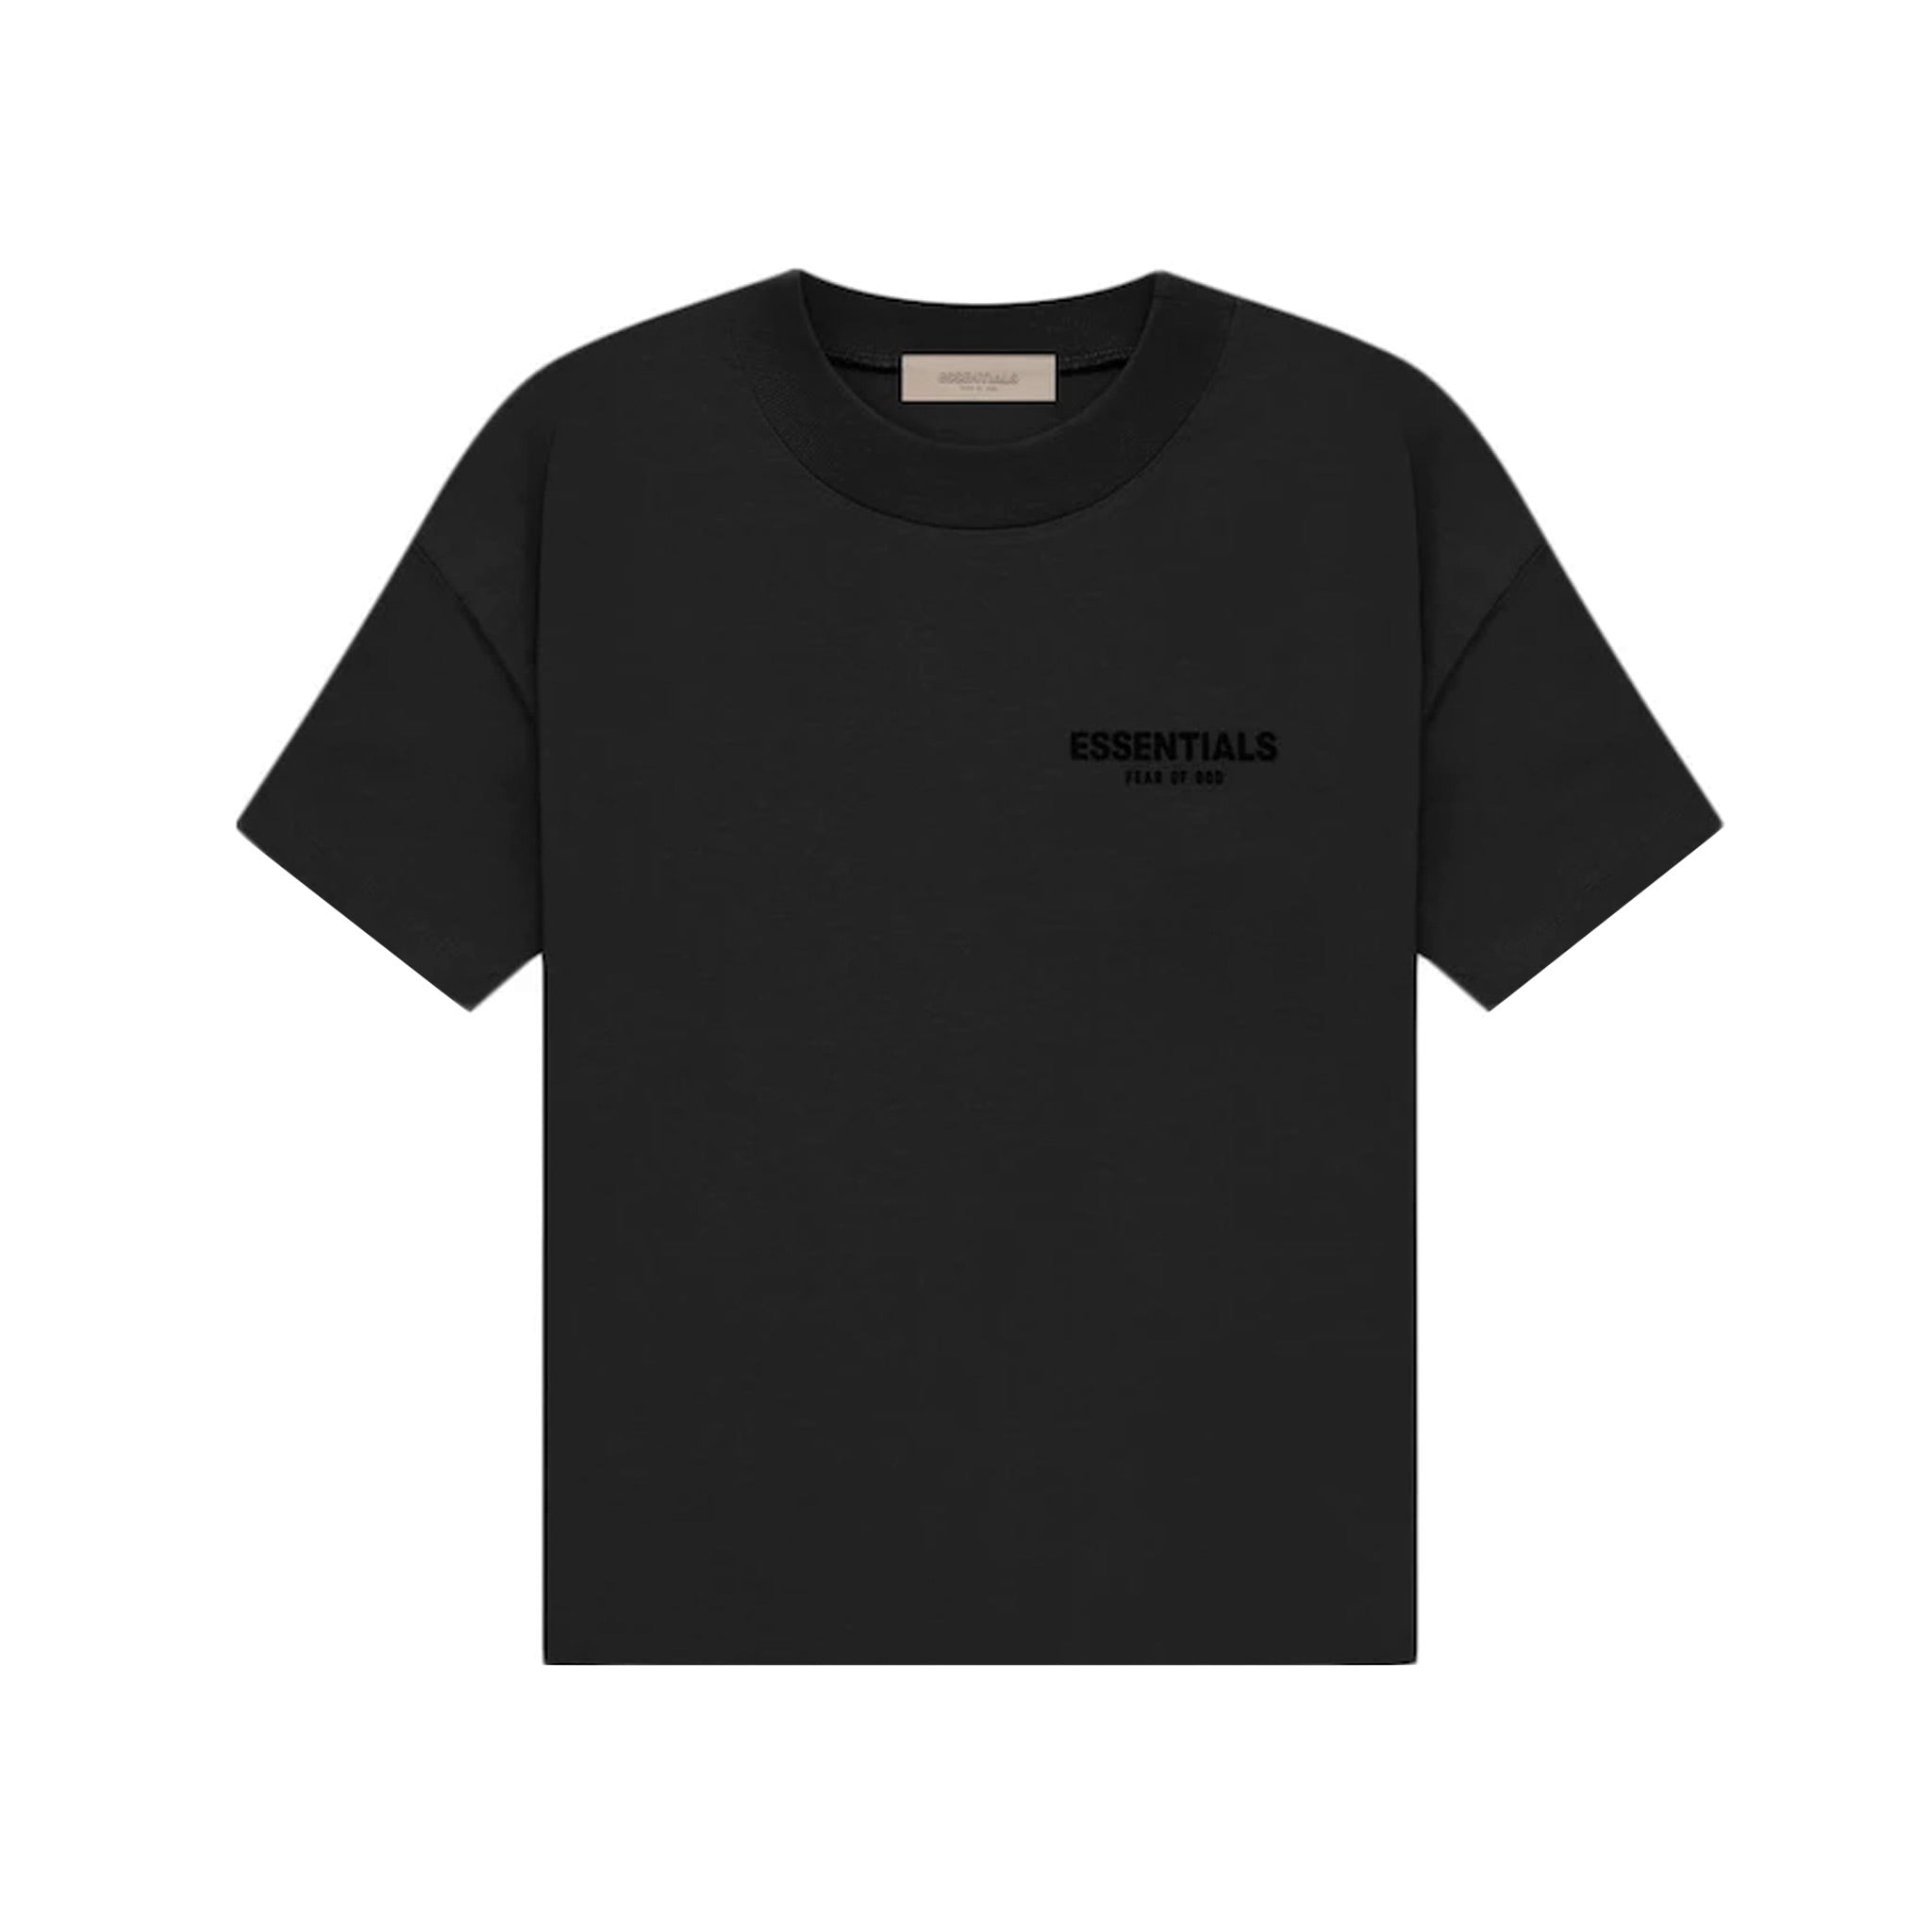 Fear Of God Essentials Tee SS22 - Stretch Limo Black FRONT | Australia New Zealand